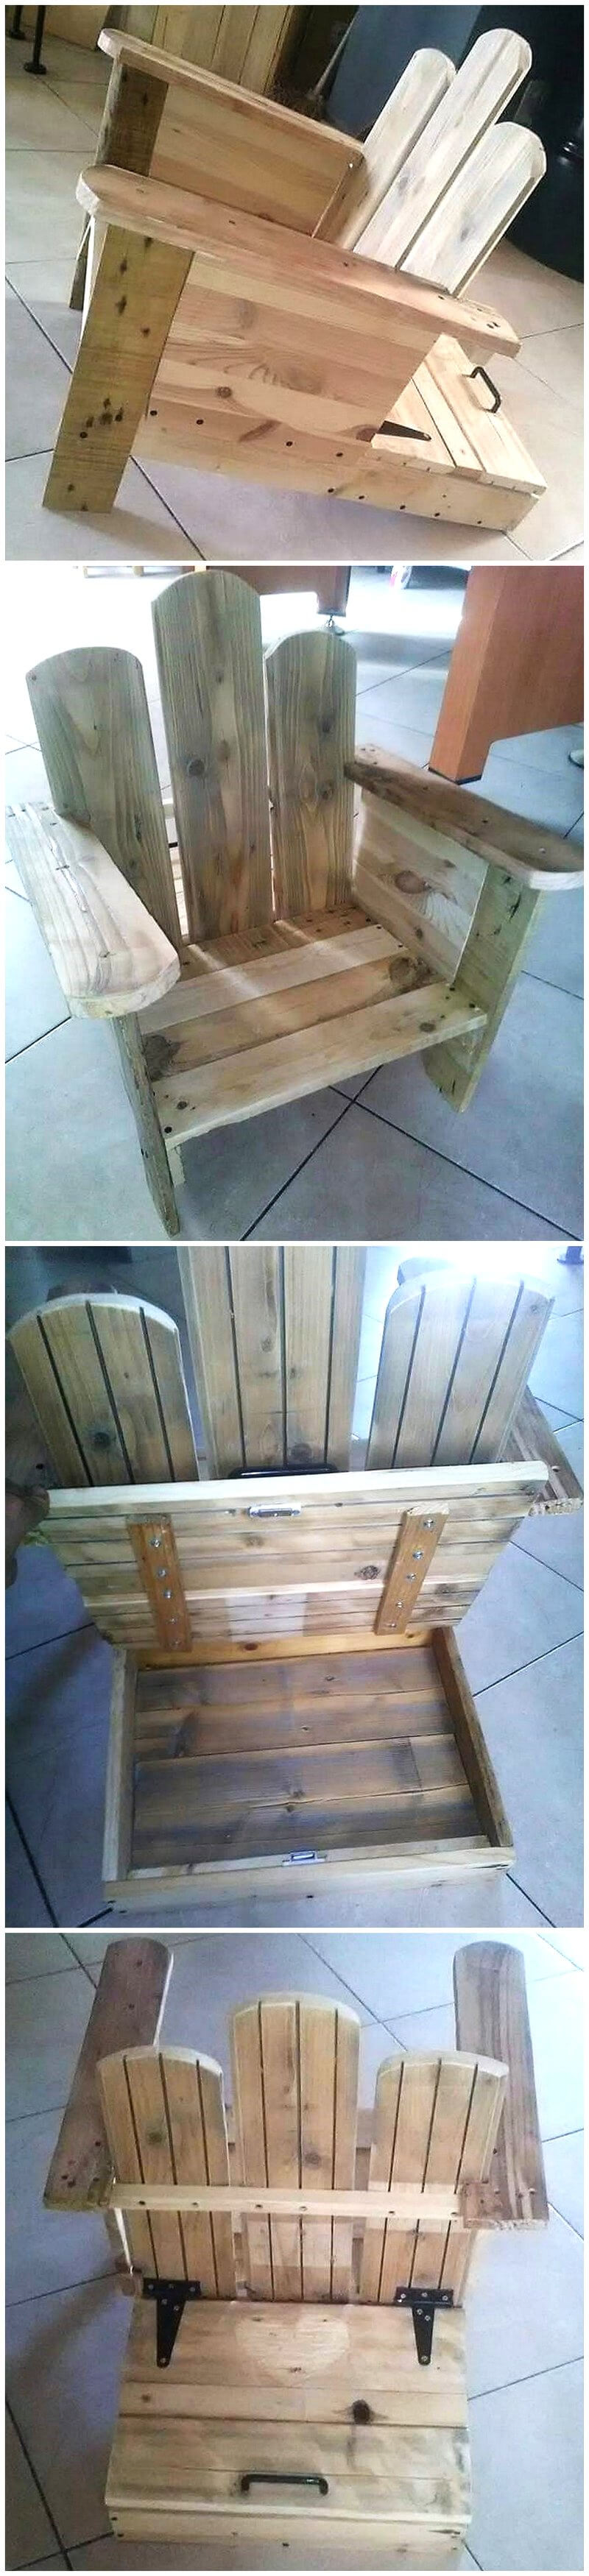 pallets made chair plan